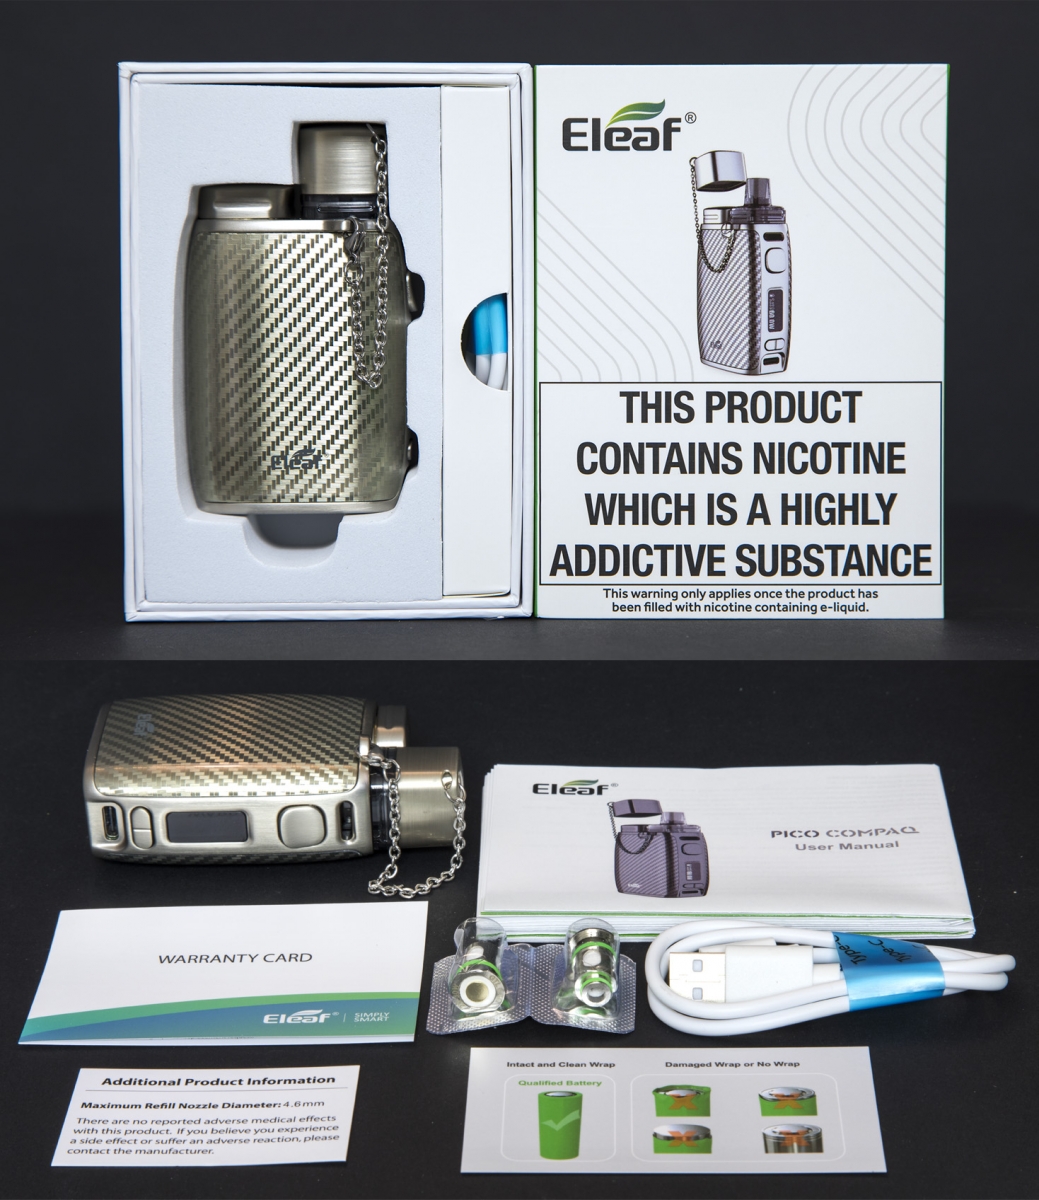 Eleaf Pico Compaq packaging and contents